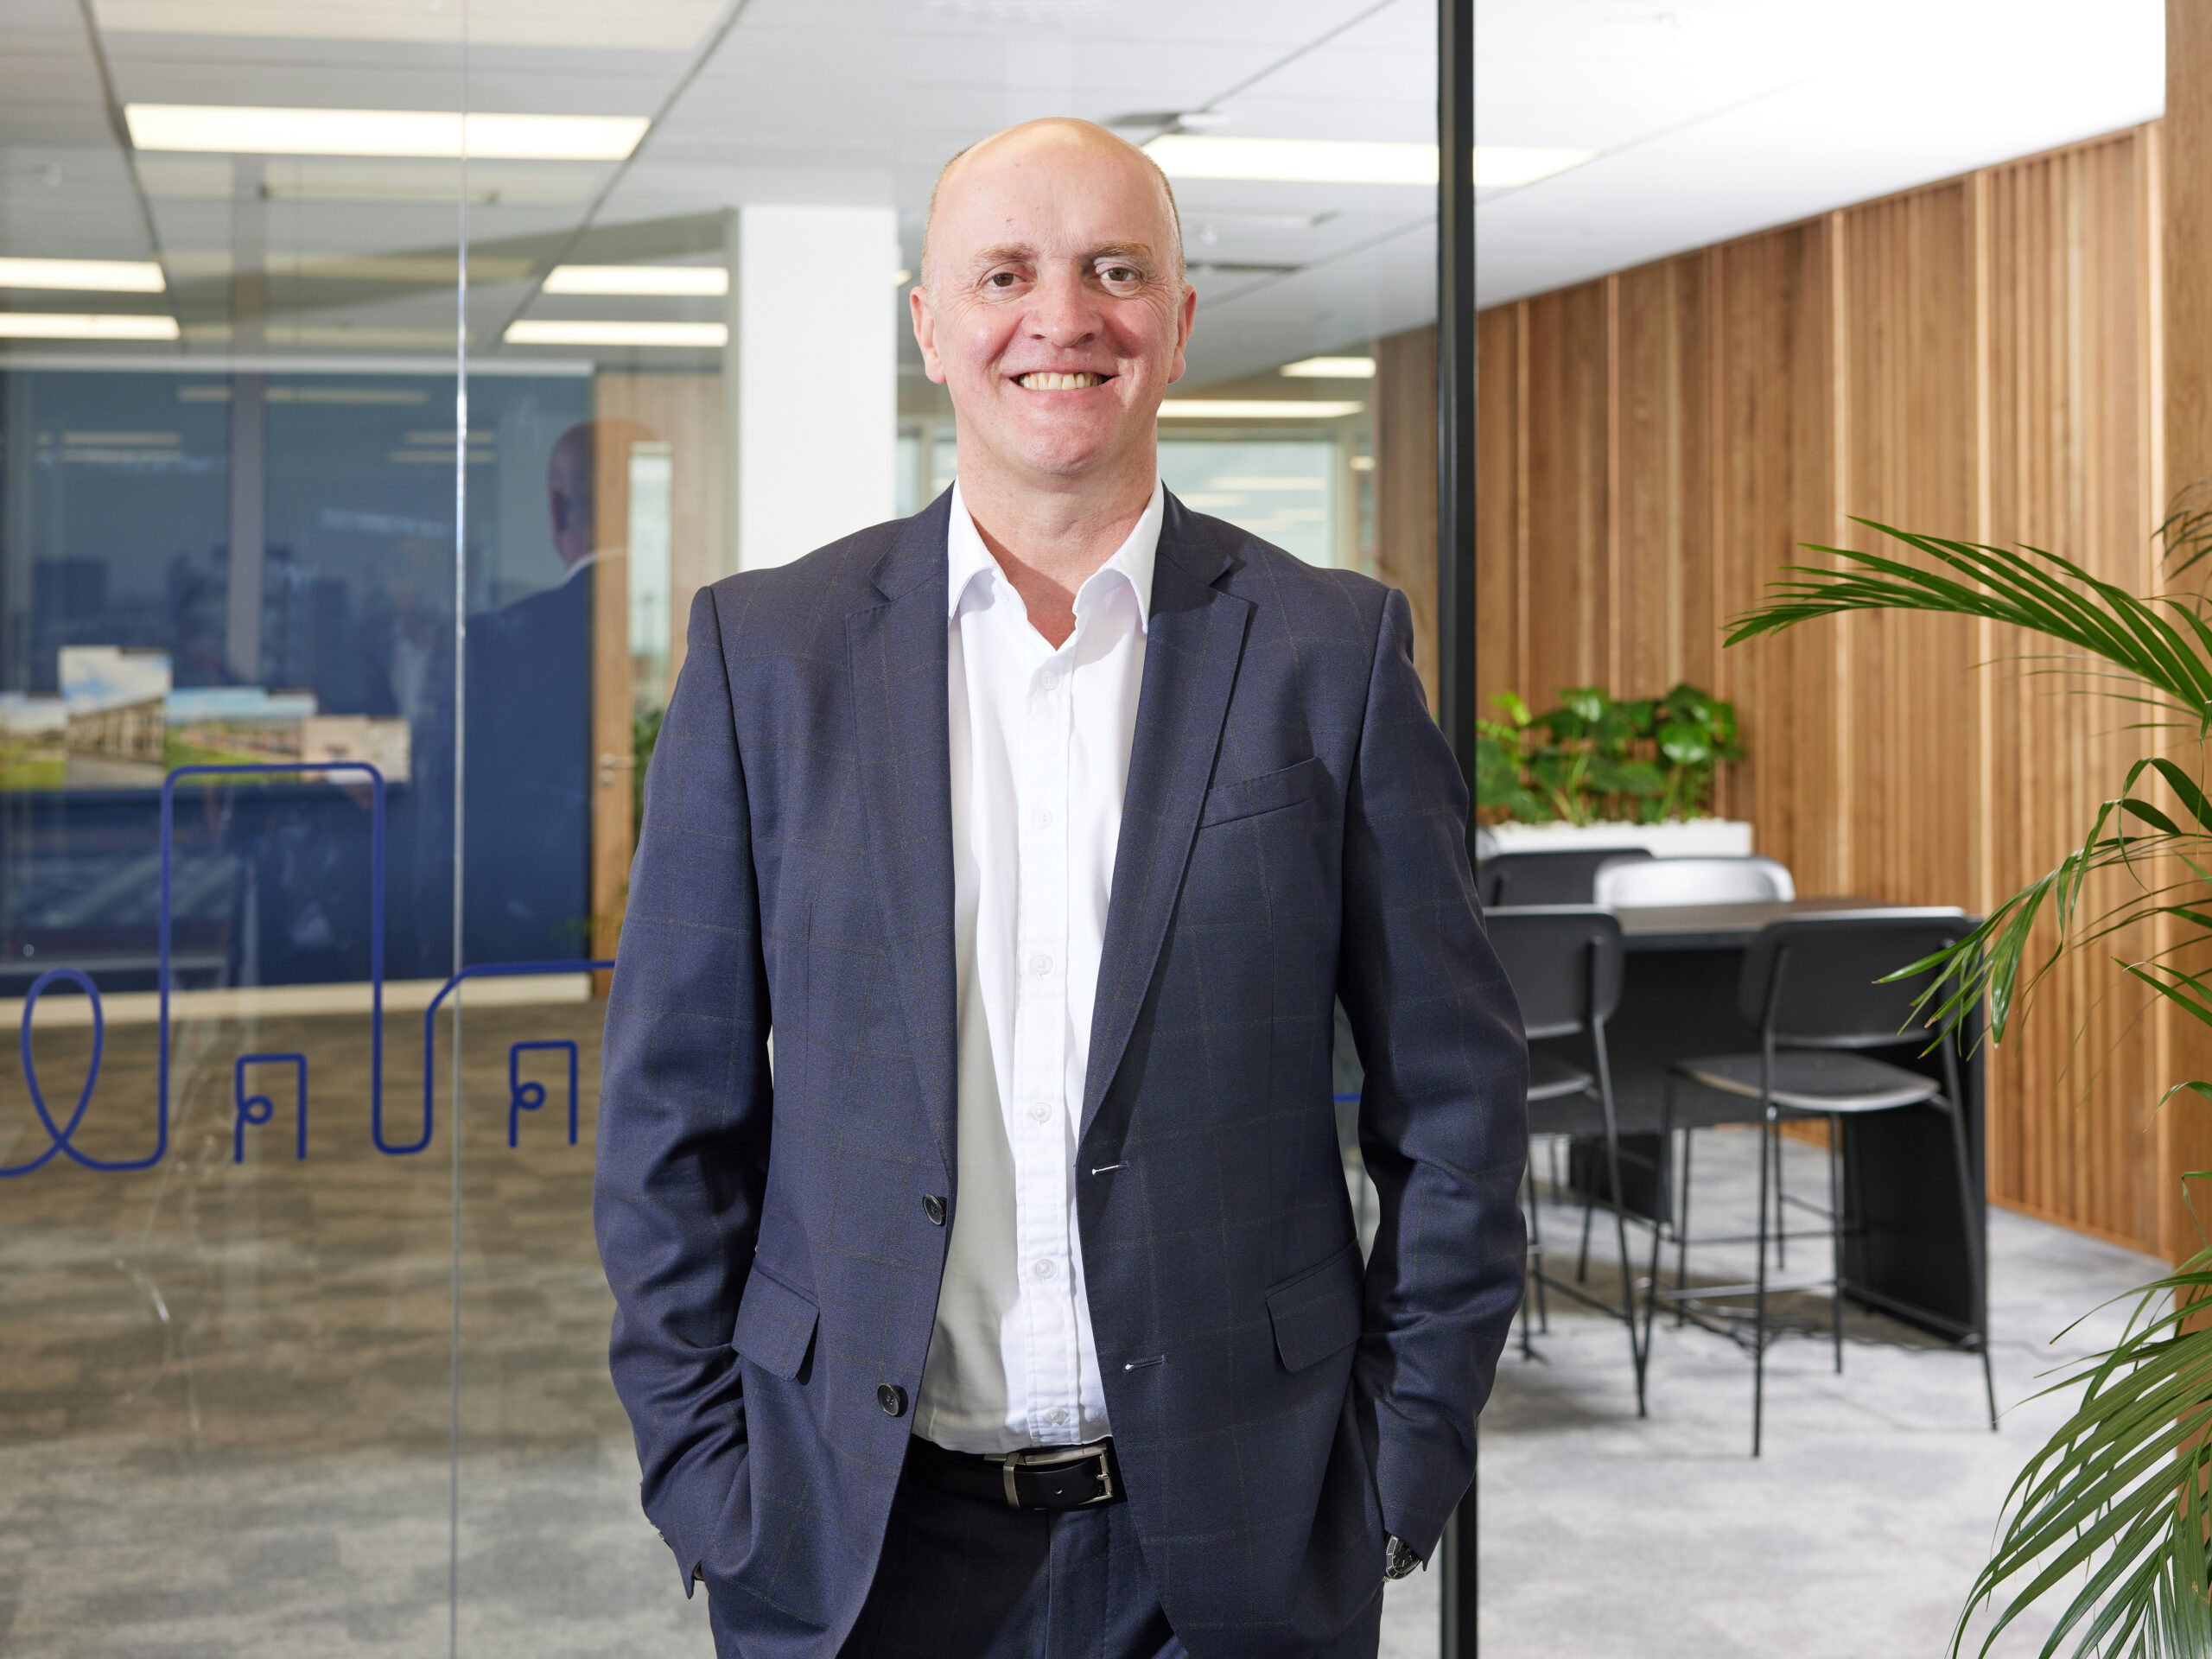 DARRAN LAWLESS, PLACEFIRST | Is responsible for driving UK growth for the leading and award-winning build-to-rent provider. As well as overseeing new developments, Darran has responsibility for building strategic relationships, working with external providers and managing existing partnerships.